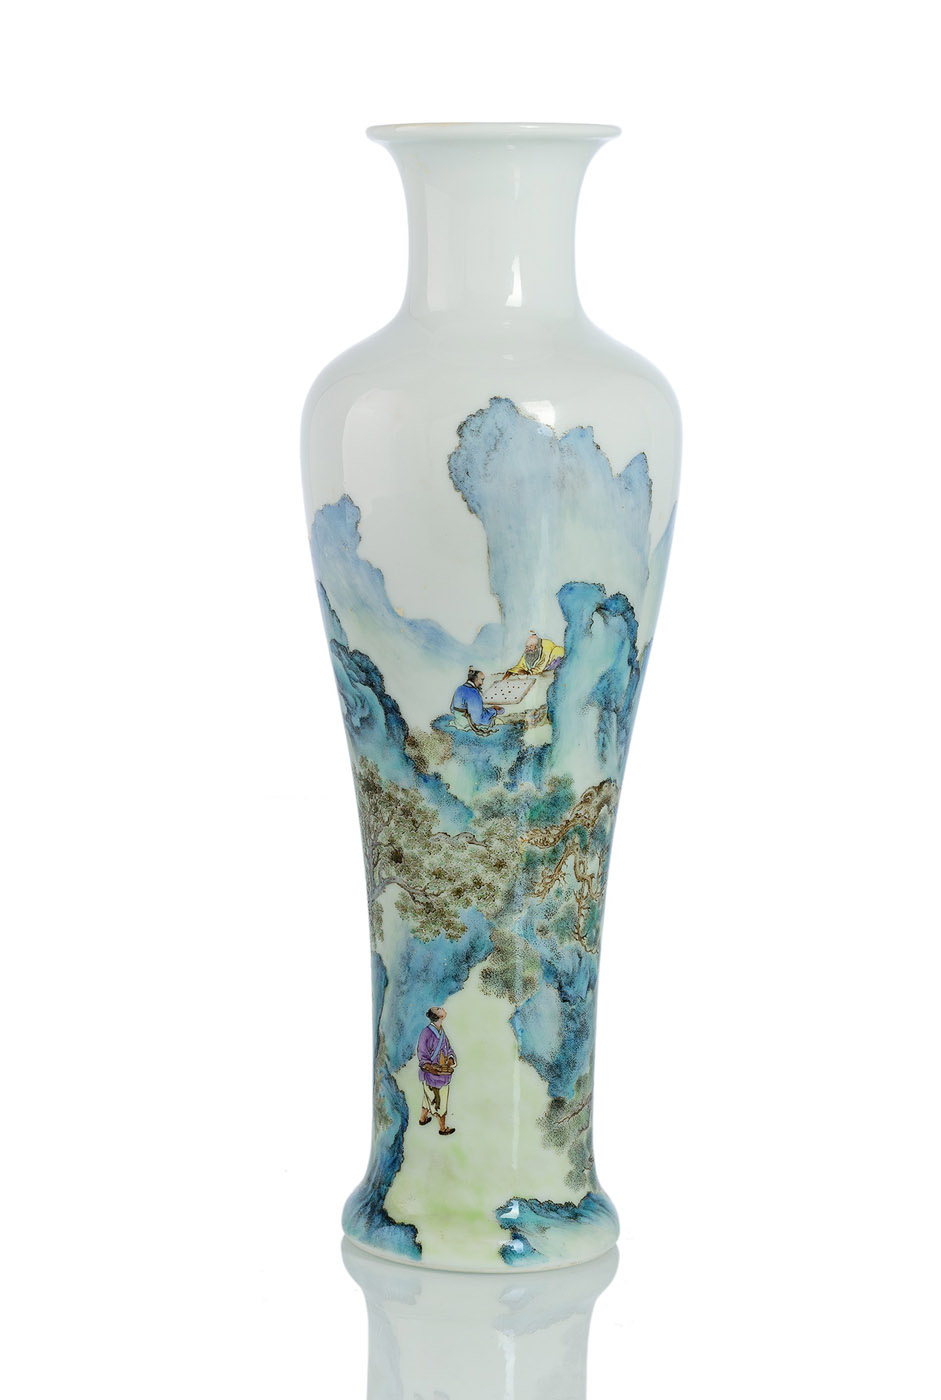 <b>A FINE PAINTED PORCELAIN VASE WITH GO PLAYERS AND SERVANT IN A MOUNTAIN LANDSCAPE</b>